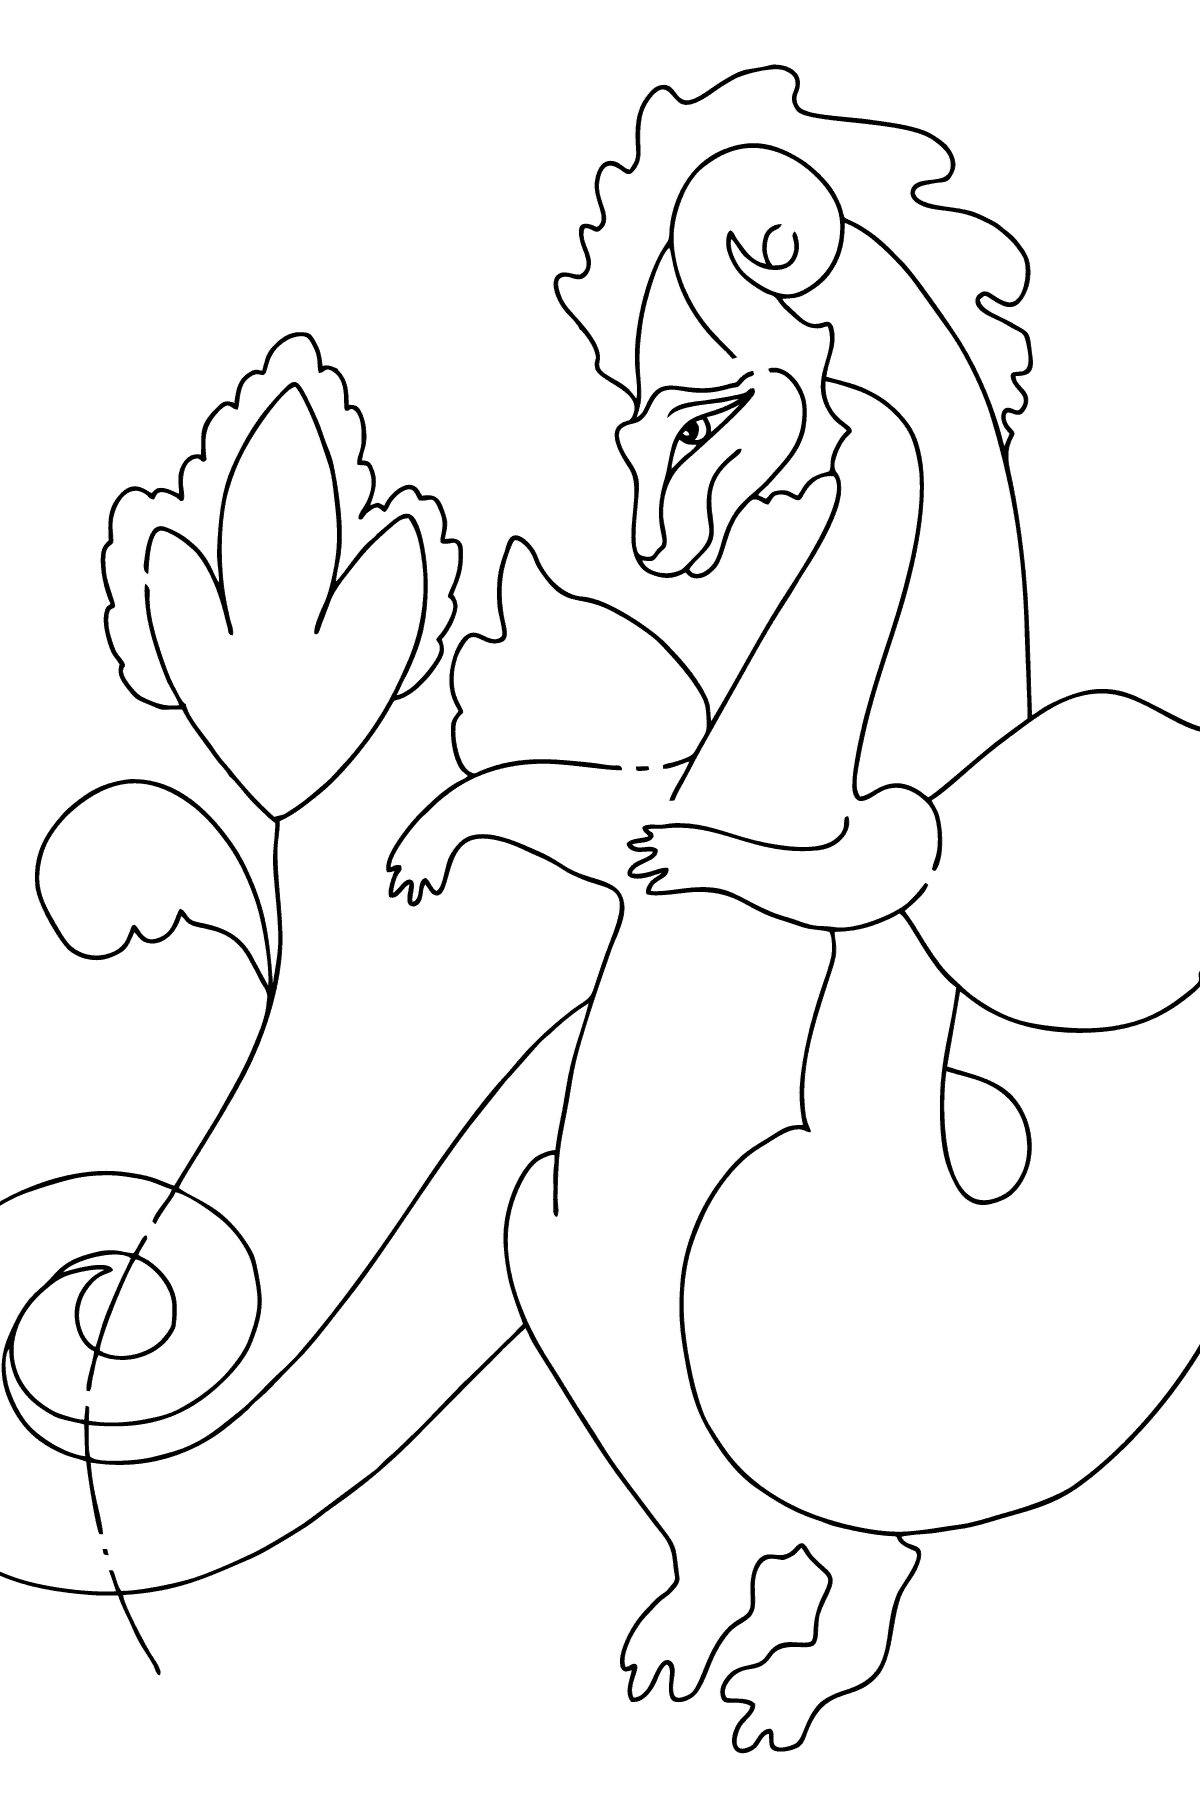 Dragon and Flower Coloring Page (simple) - Coloring Pages for Kids